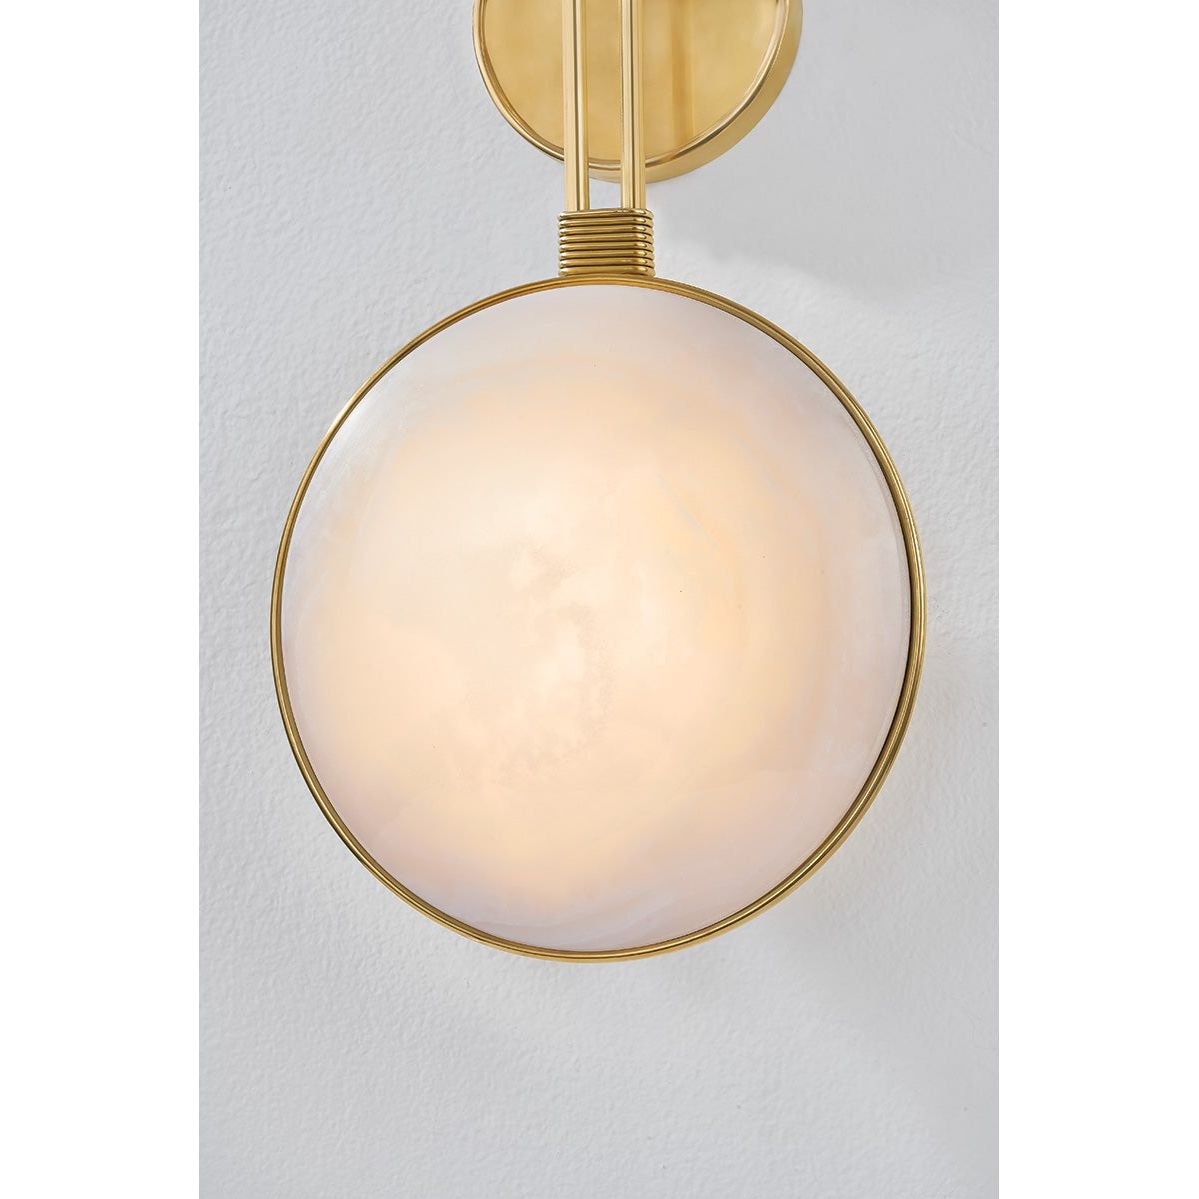 Ares 1-Light Wall Sconce